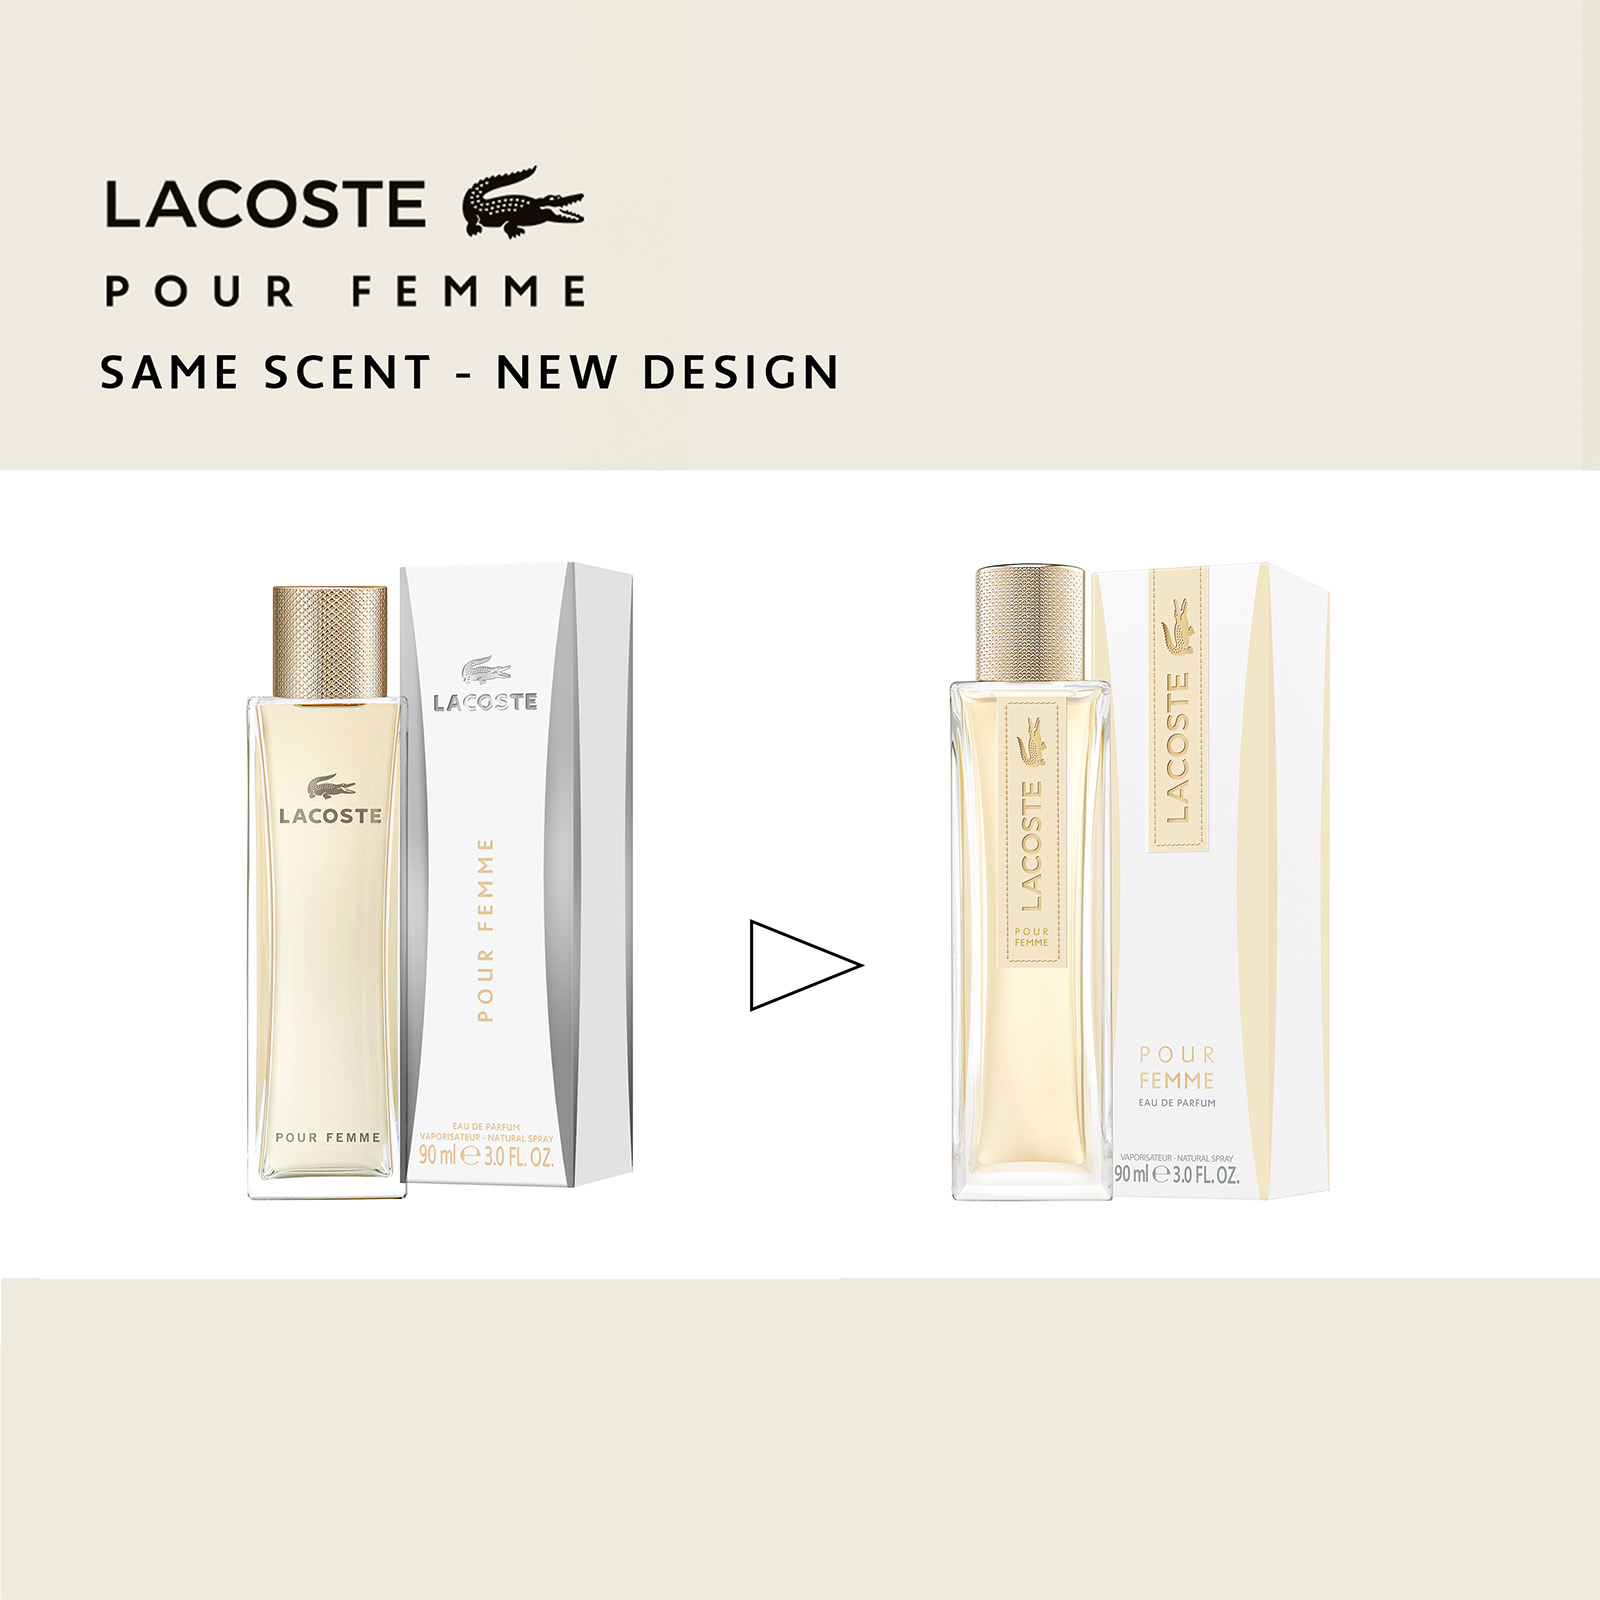 Image shows the old packaging and bottle vs the new design. Text - Lacoste pour femme. Same scent - New design.